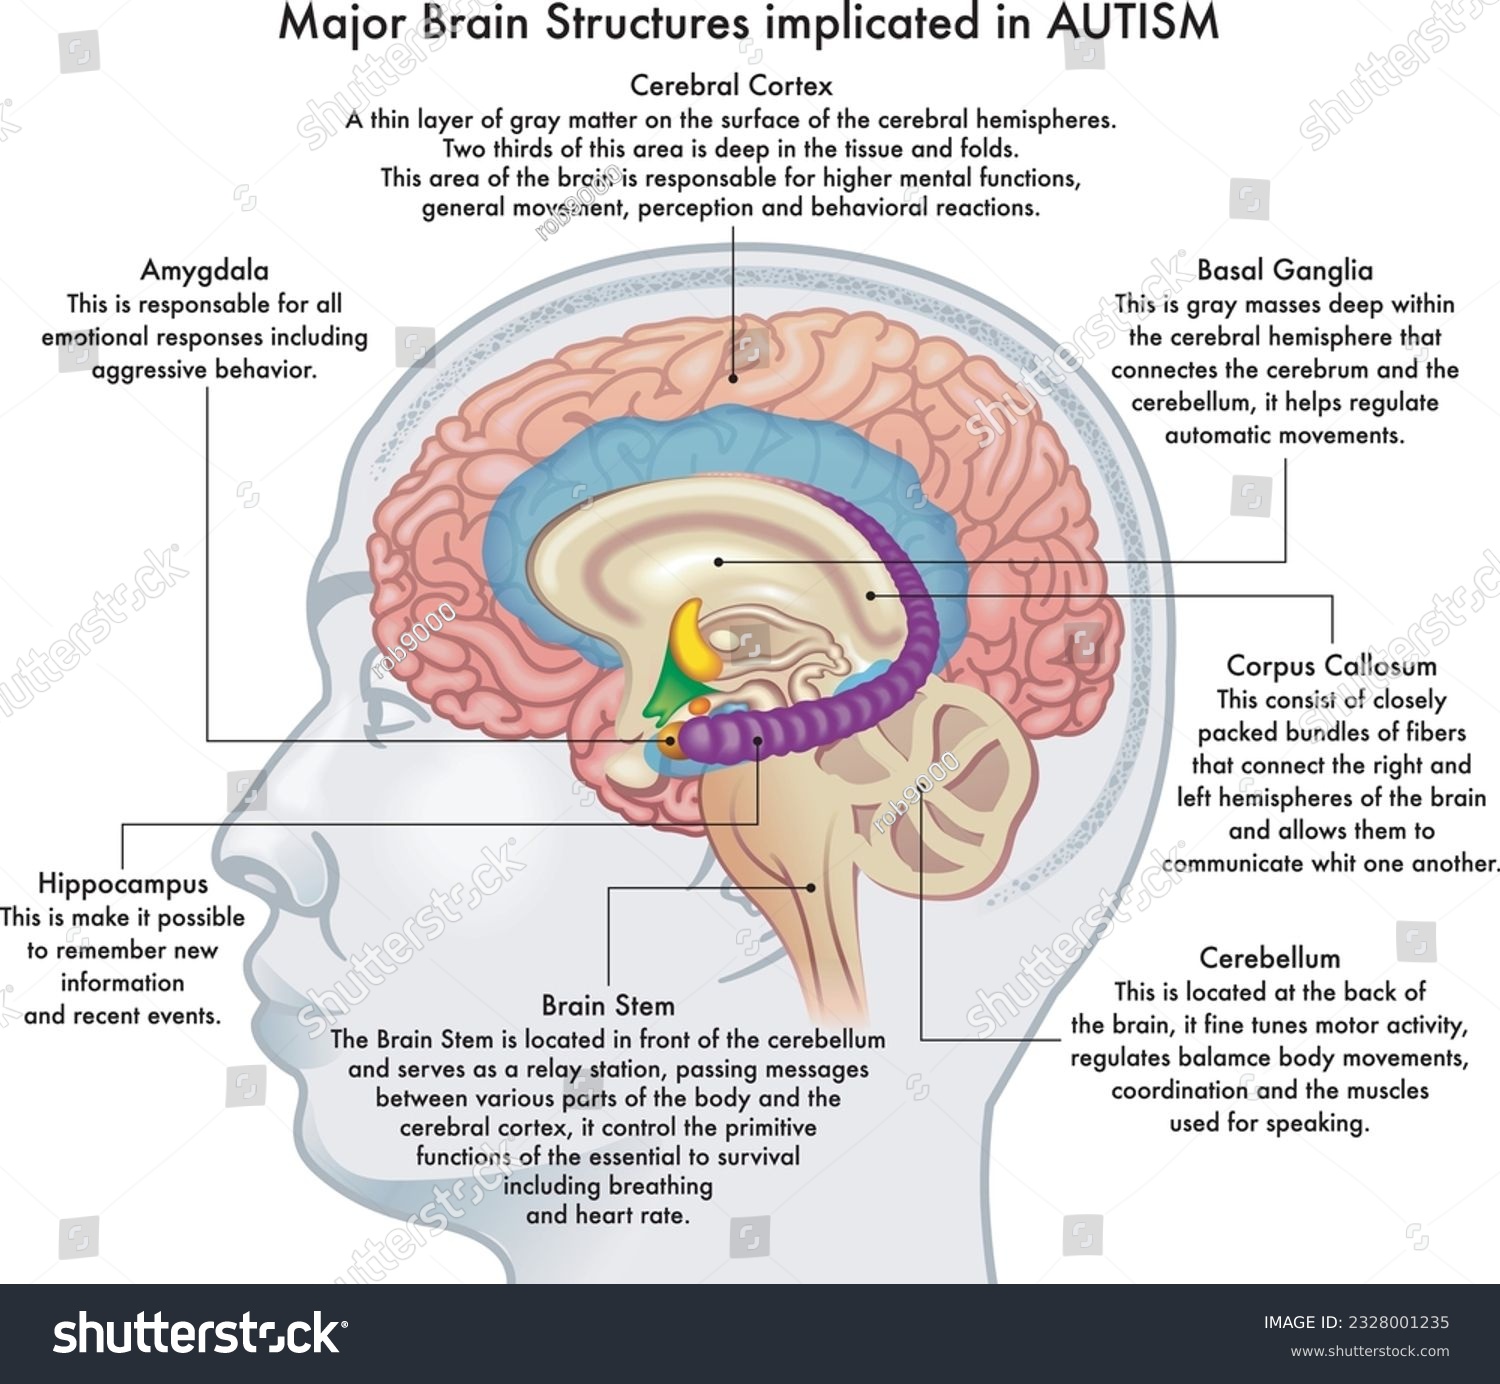 SVG of Medical illustration showing major brain structures implicated in autism spectrum disorder, with annotations. svg